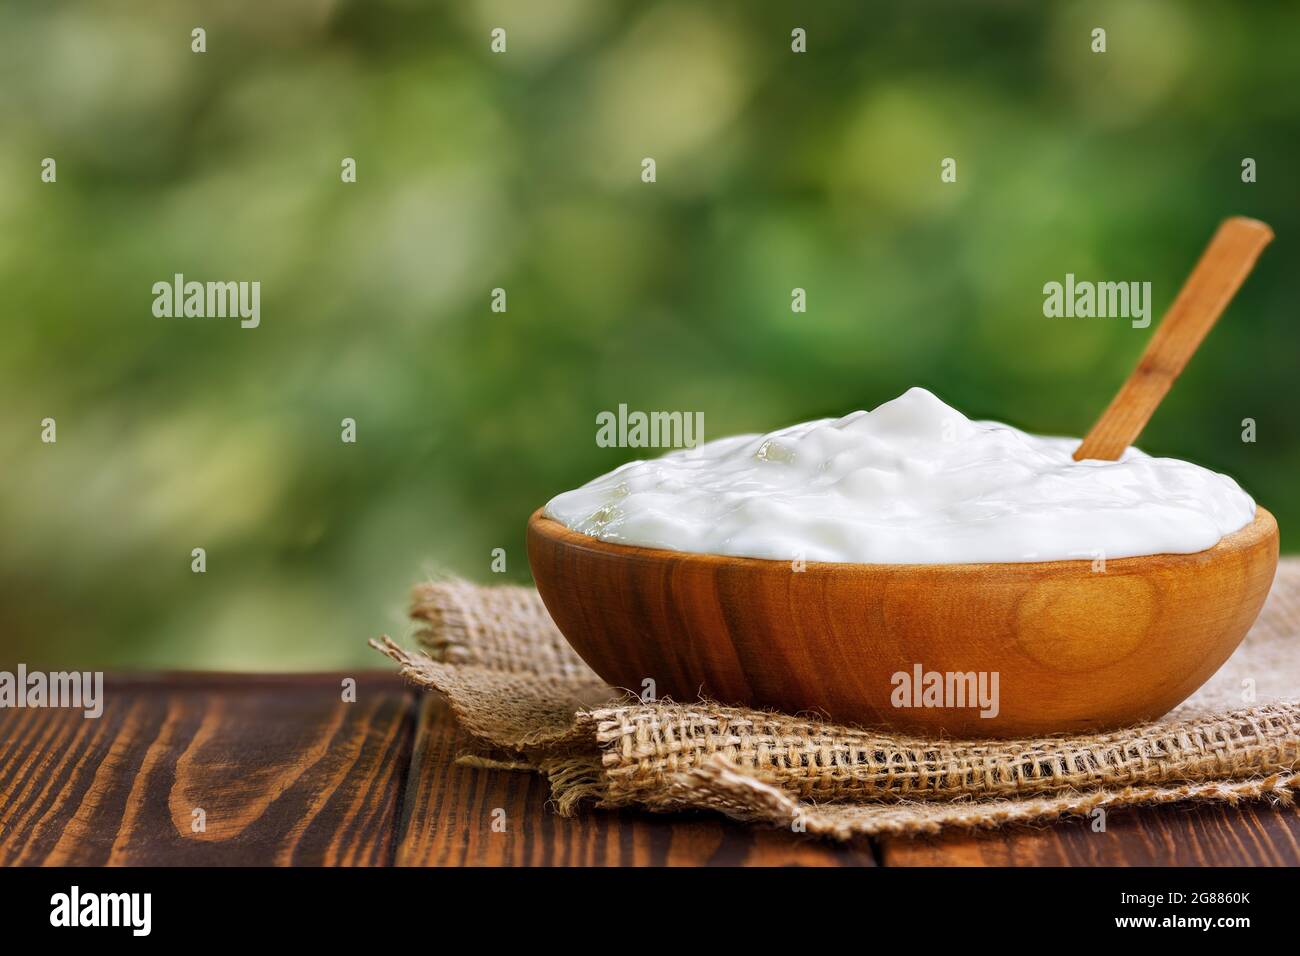 sour cream in wooden bowl on table outdoors Stock Photo